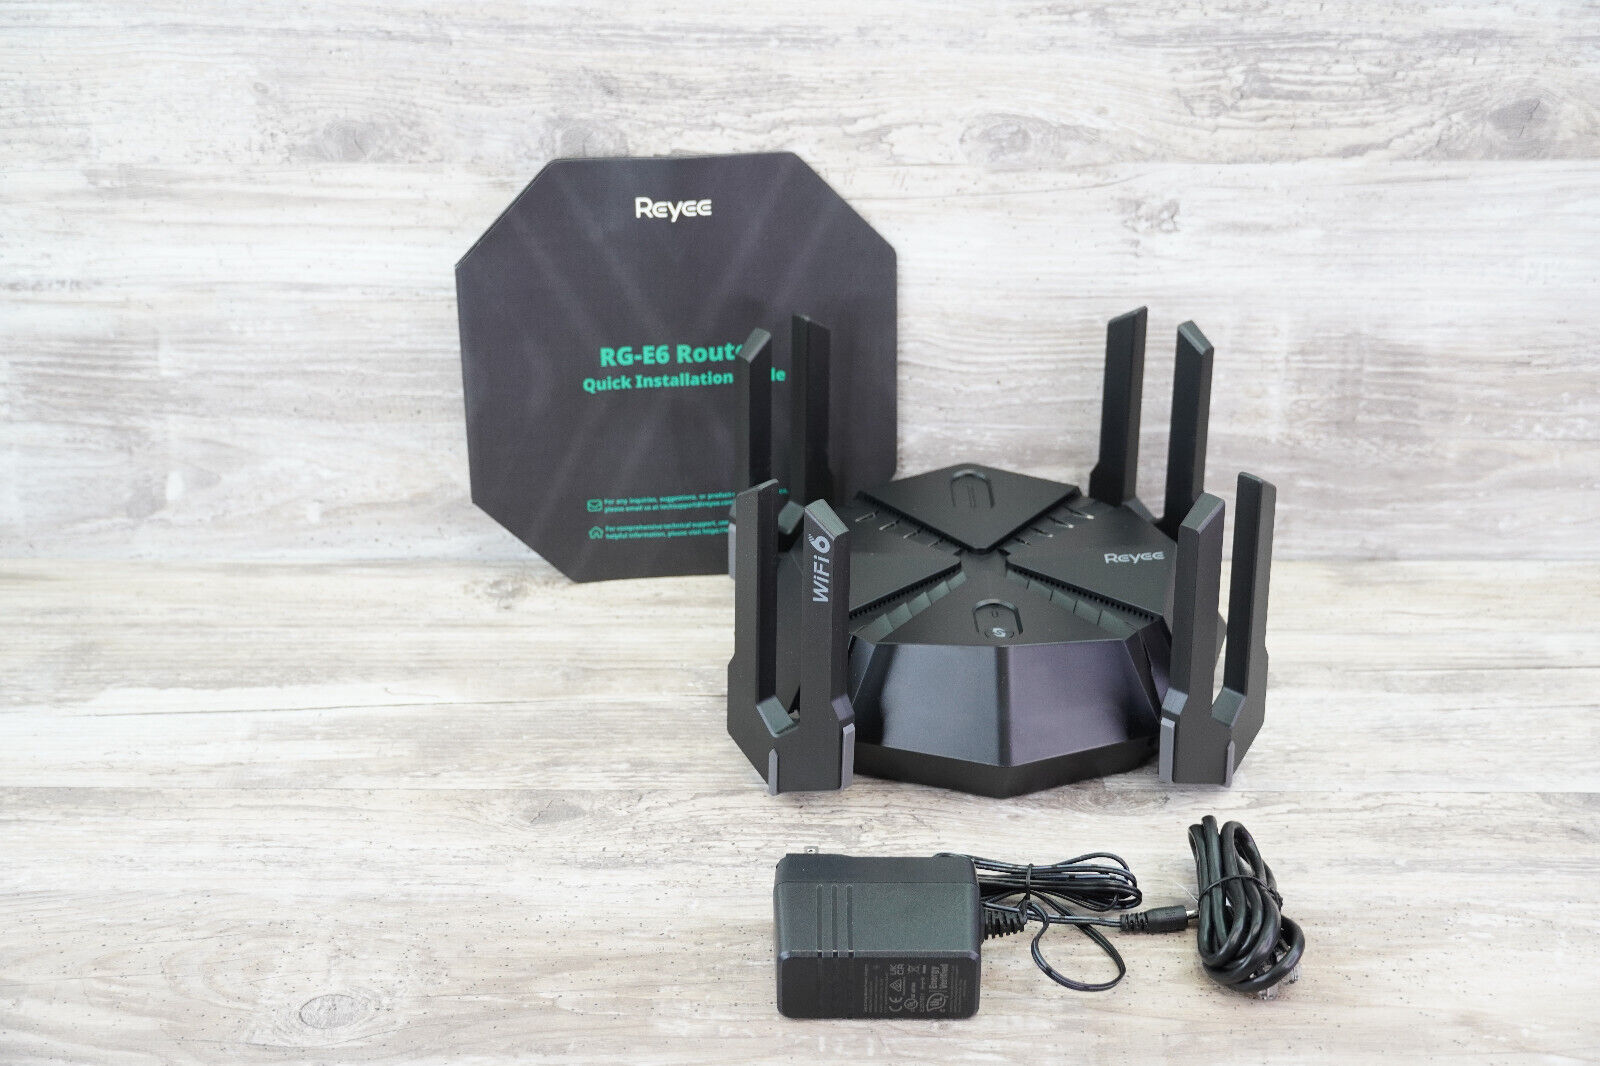 Reyee AX6000 RG-E6 WiFi 6 Router Wireless 8-Stream Gaming Router Black New Open 